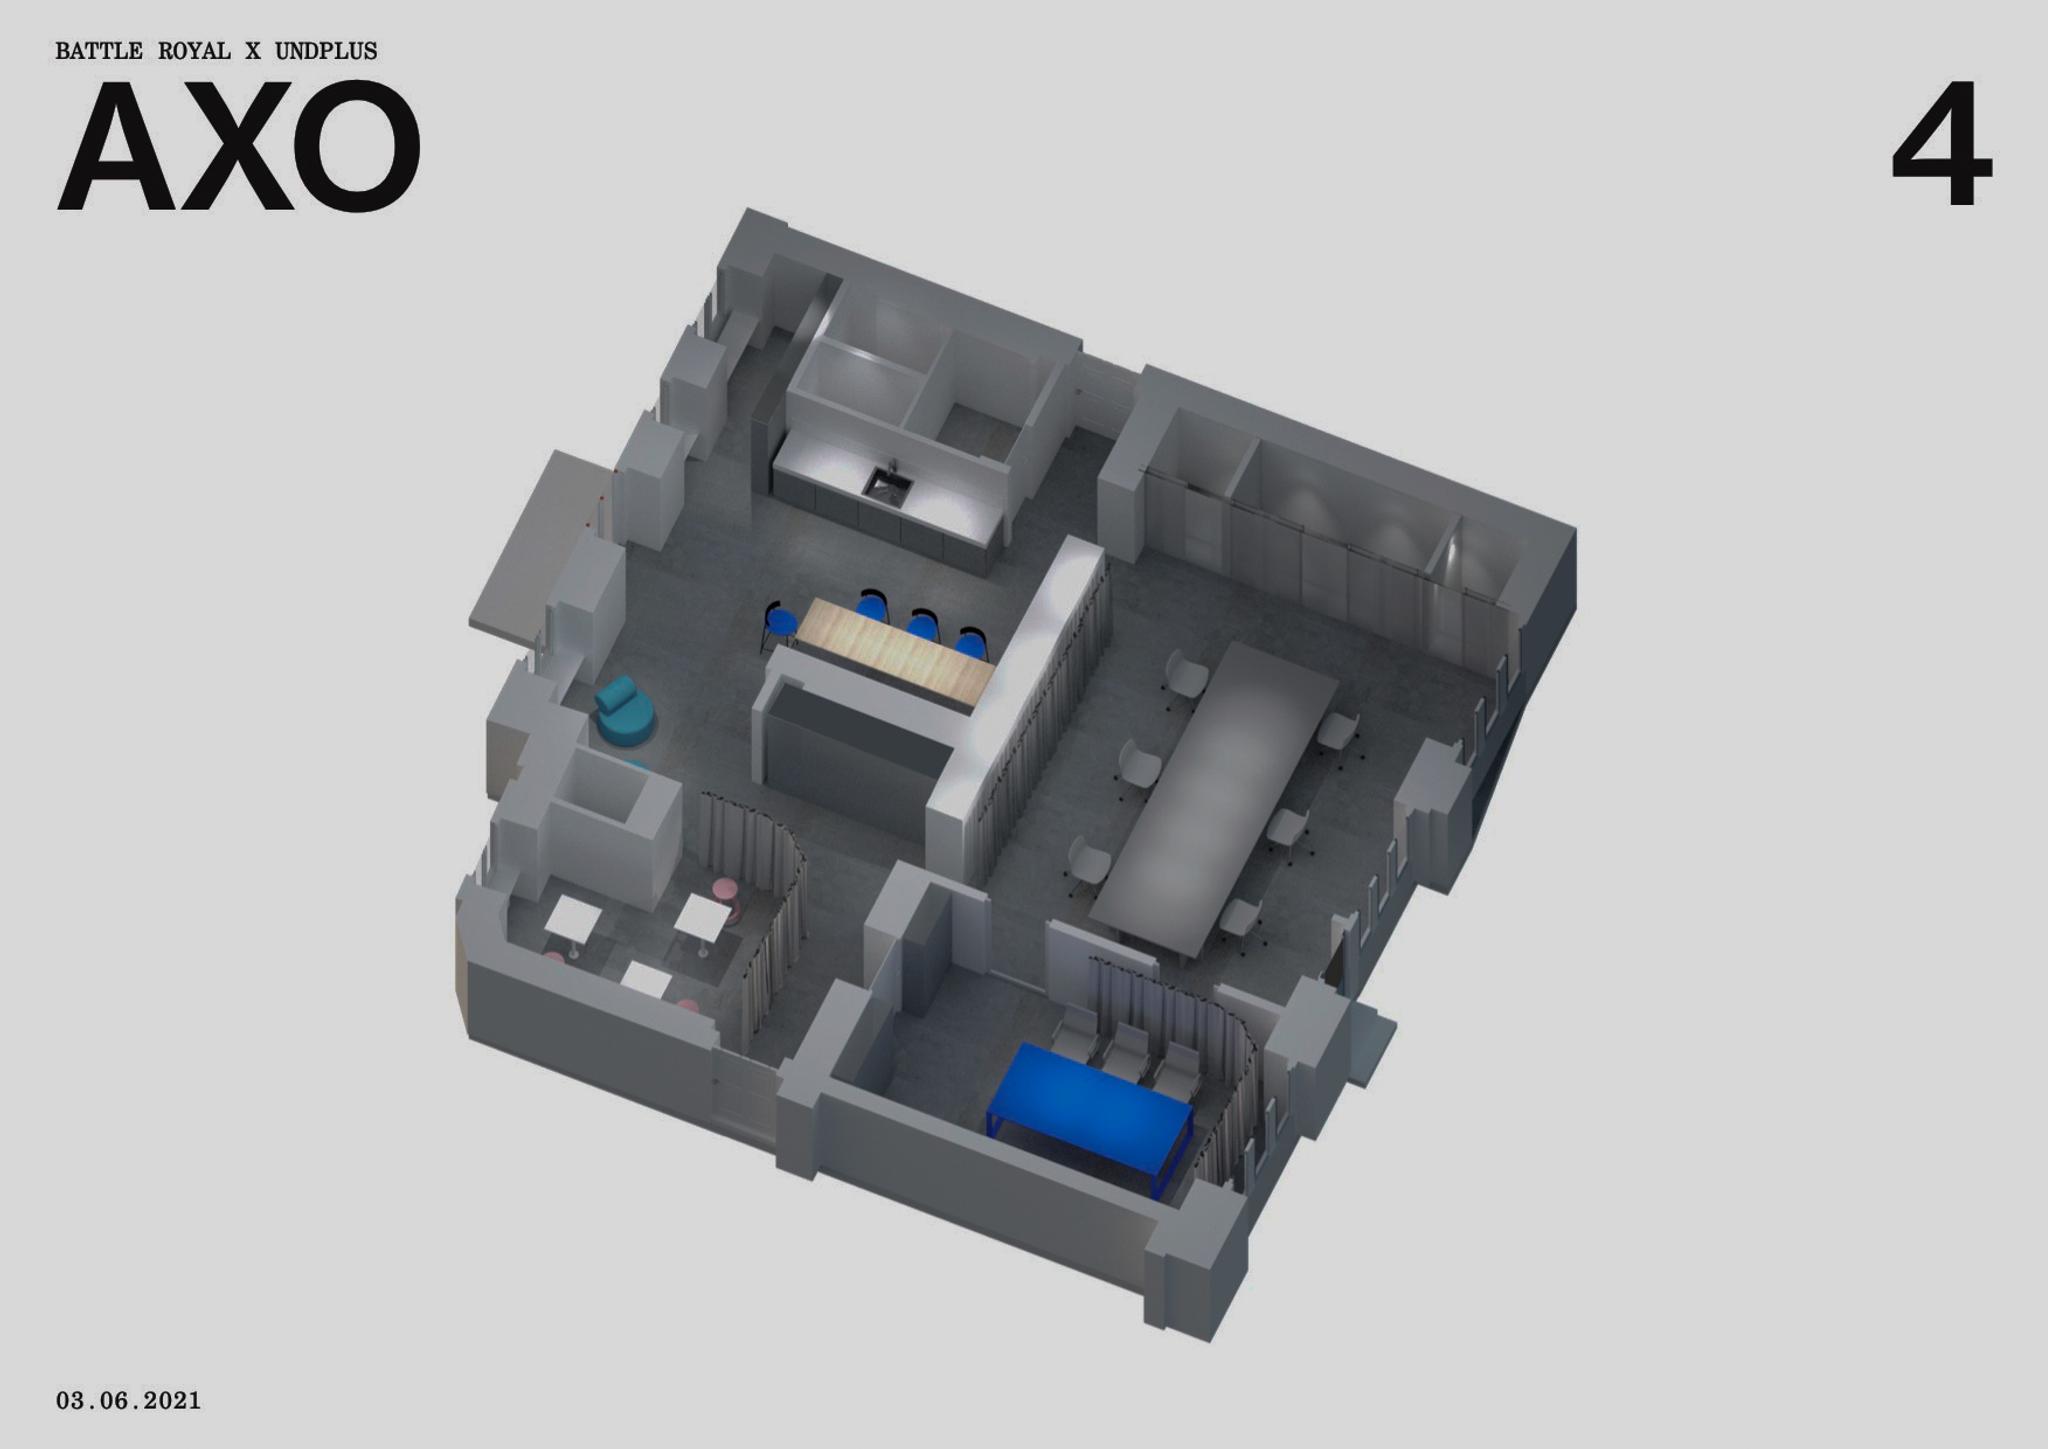 A 3D model of Battle Royal Studios' Berlin office. Gray with blue accents. The number 4 is in the right corner and "Battle Royal x Undplus AXO" is in the left corner, the date "03.06.2021" in the bottom left corner.